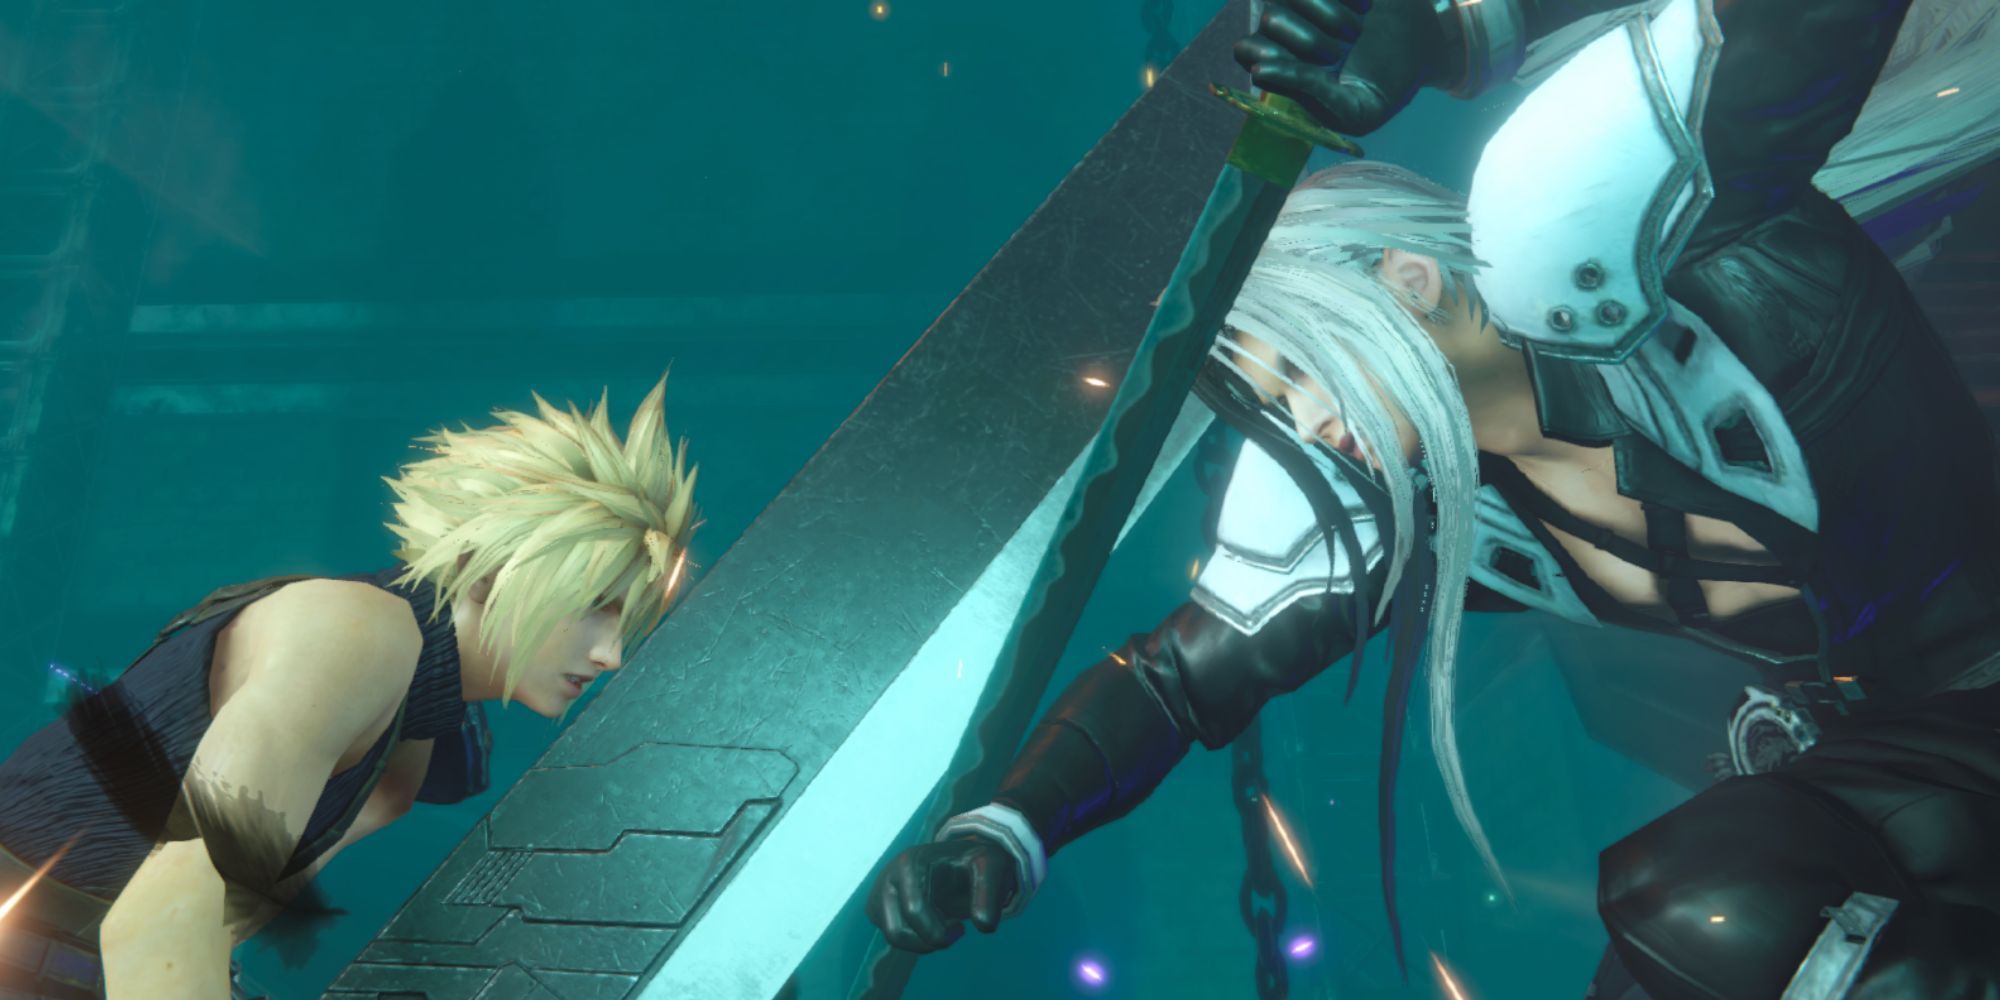 Cloud Strife and Sephiroth clash swords while fighting at the beginning of Final Fantasy 7 Ever Crisis